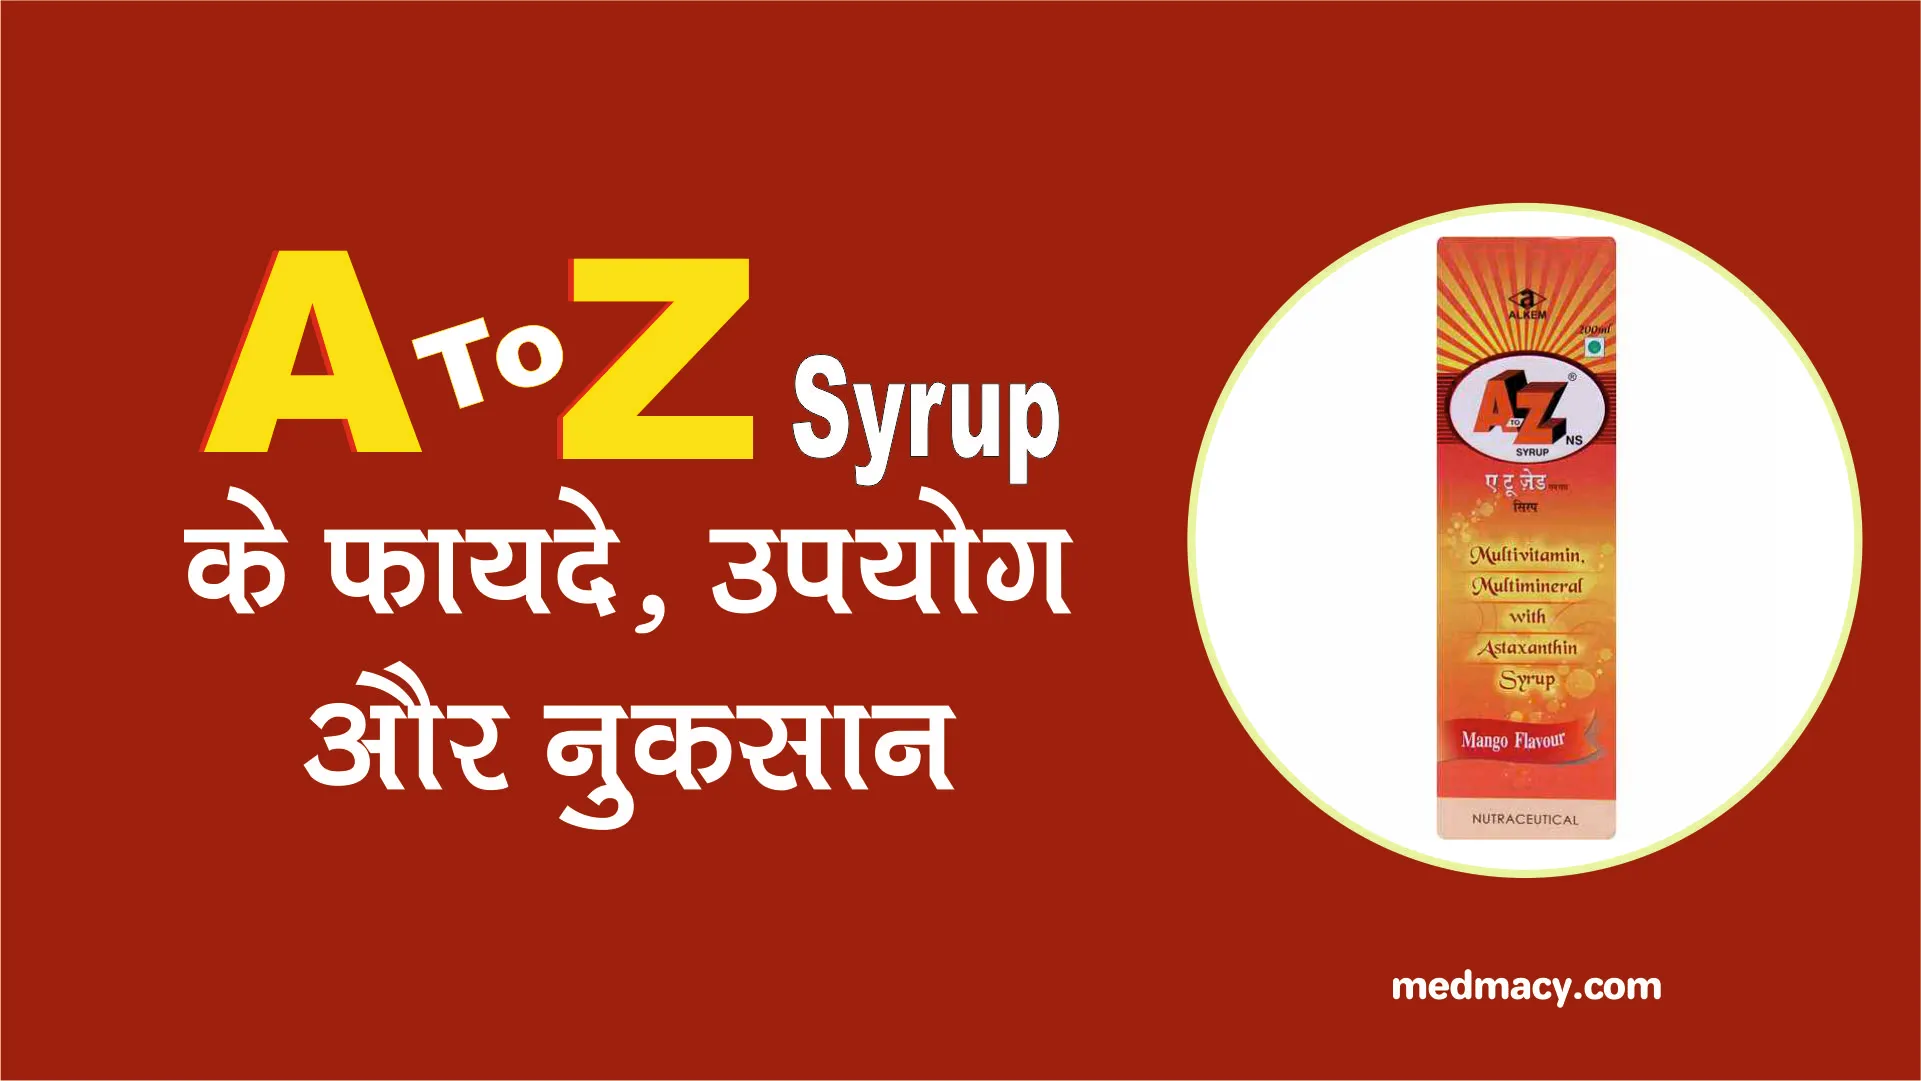 A To Z Syrup Uses in Hindi